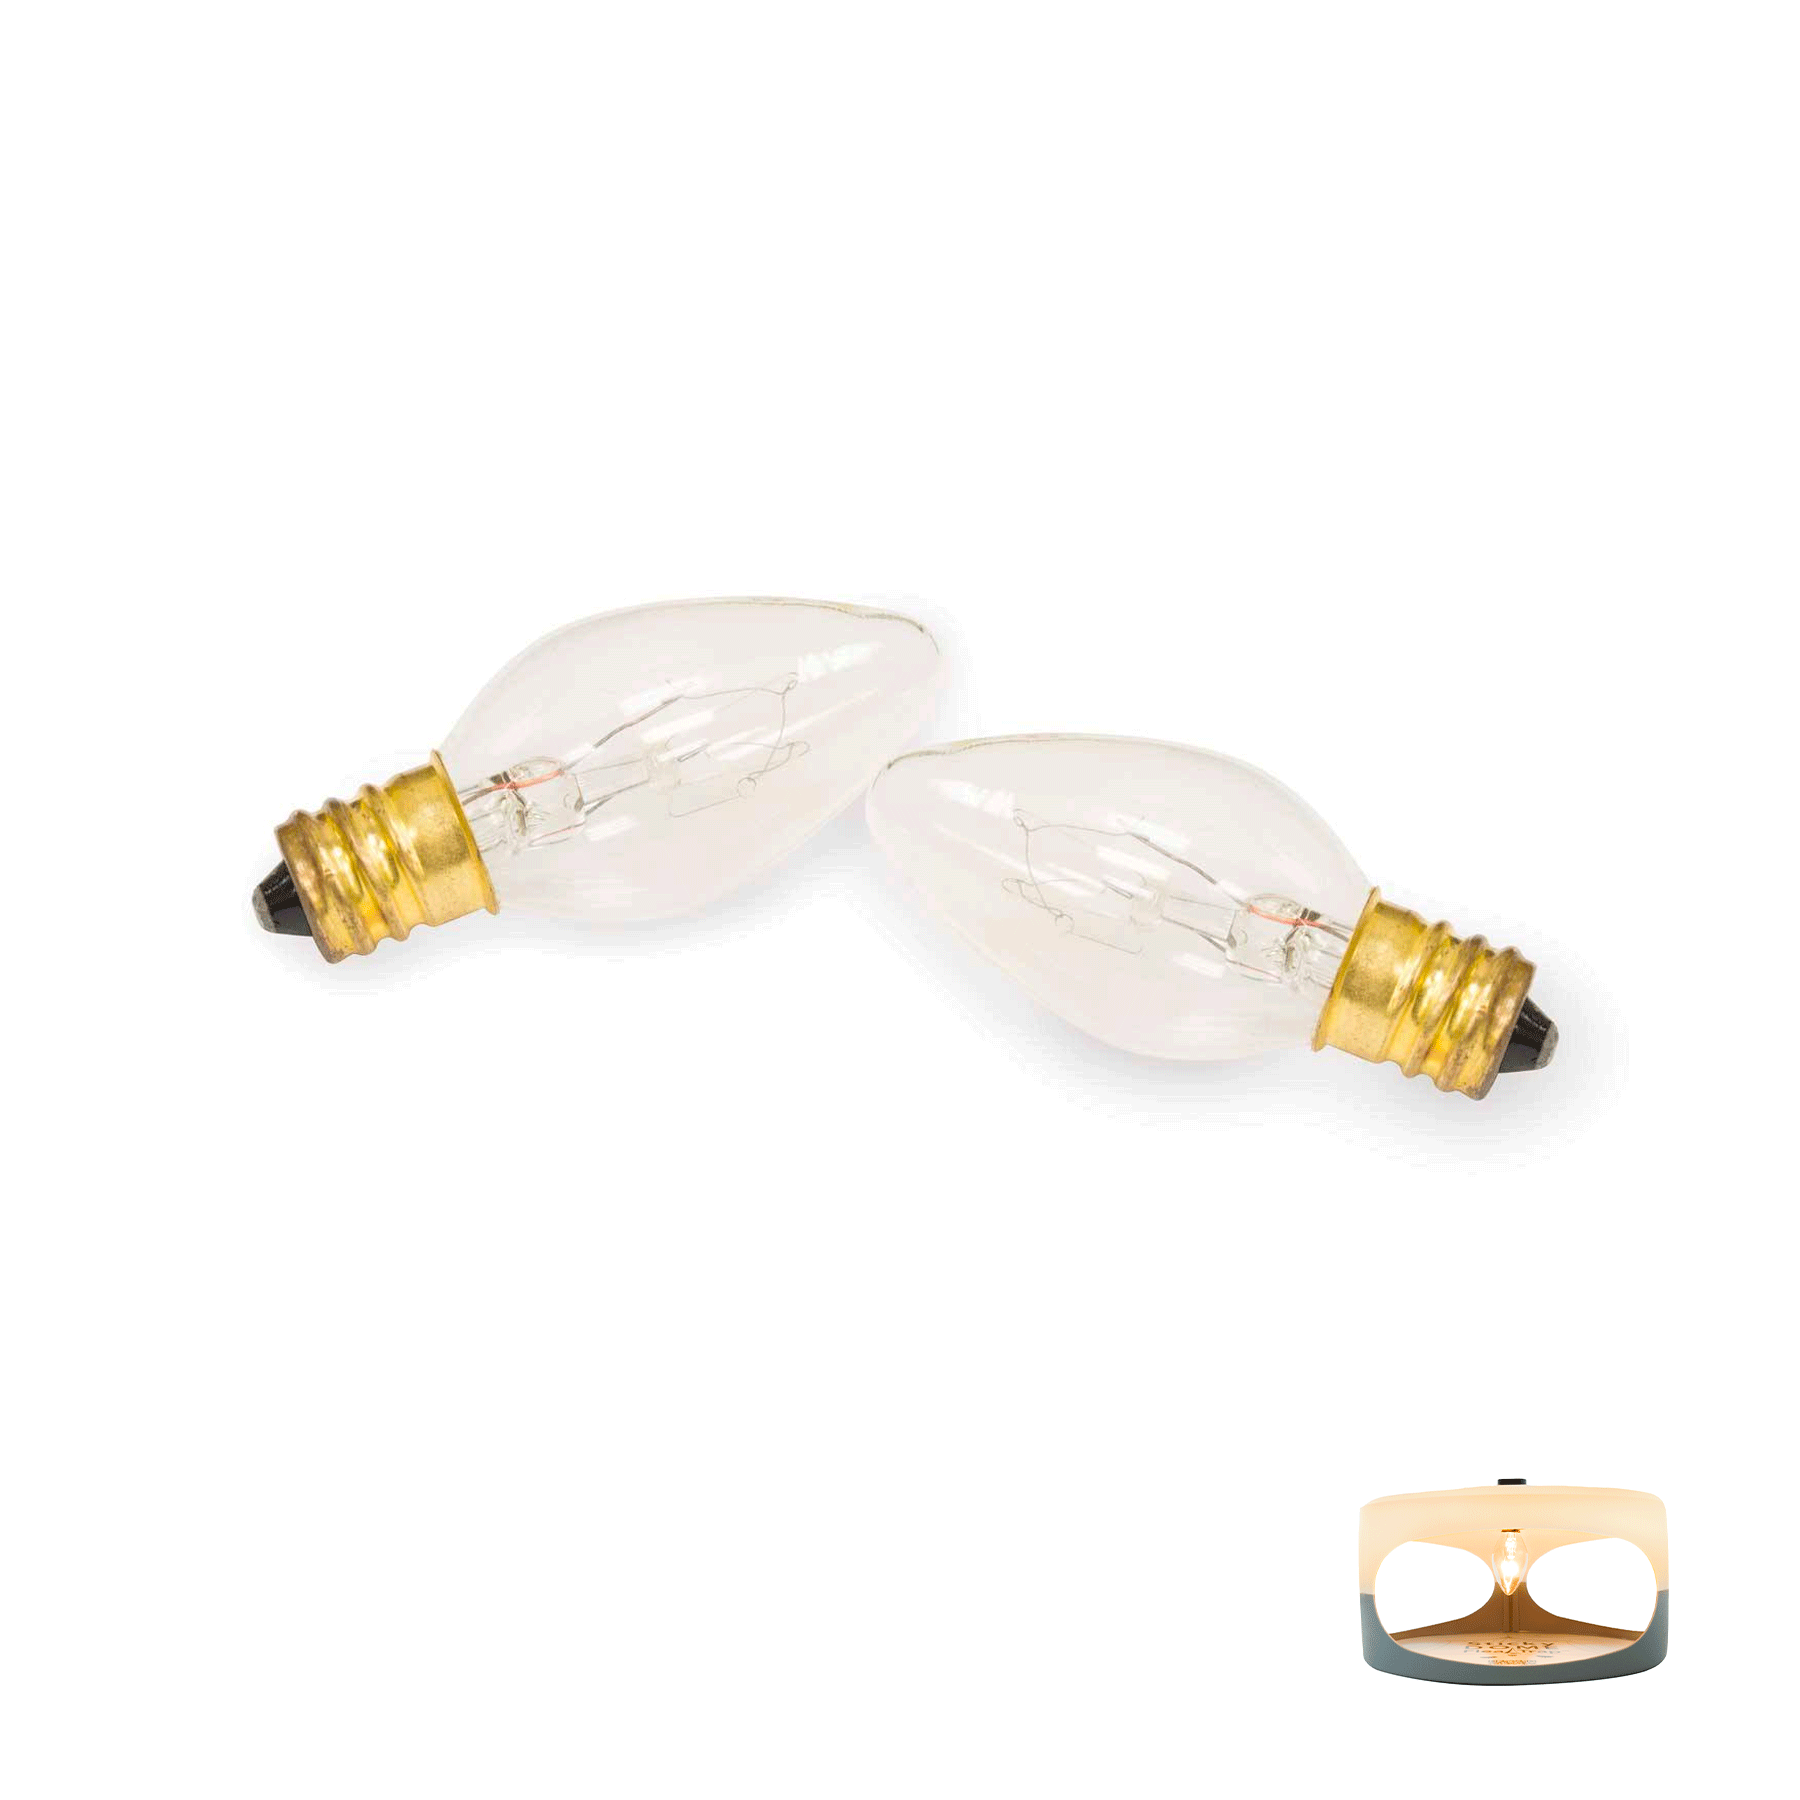 Aspectek Replacement Bulbs for Sticky Dome Flea Trap - 2 Pack